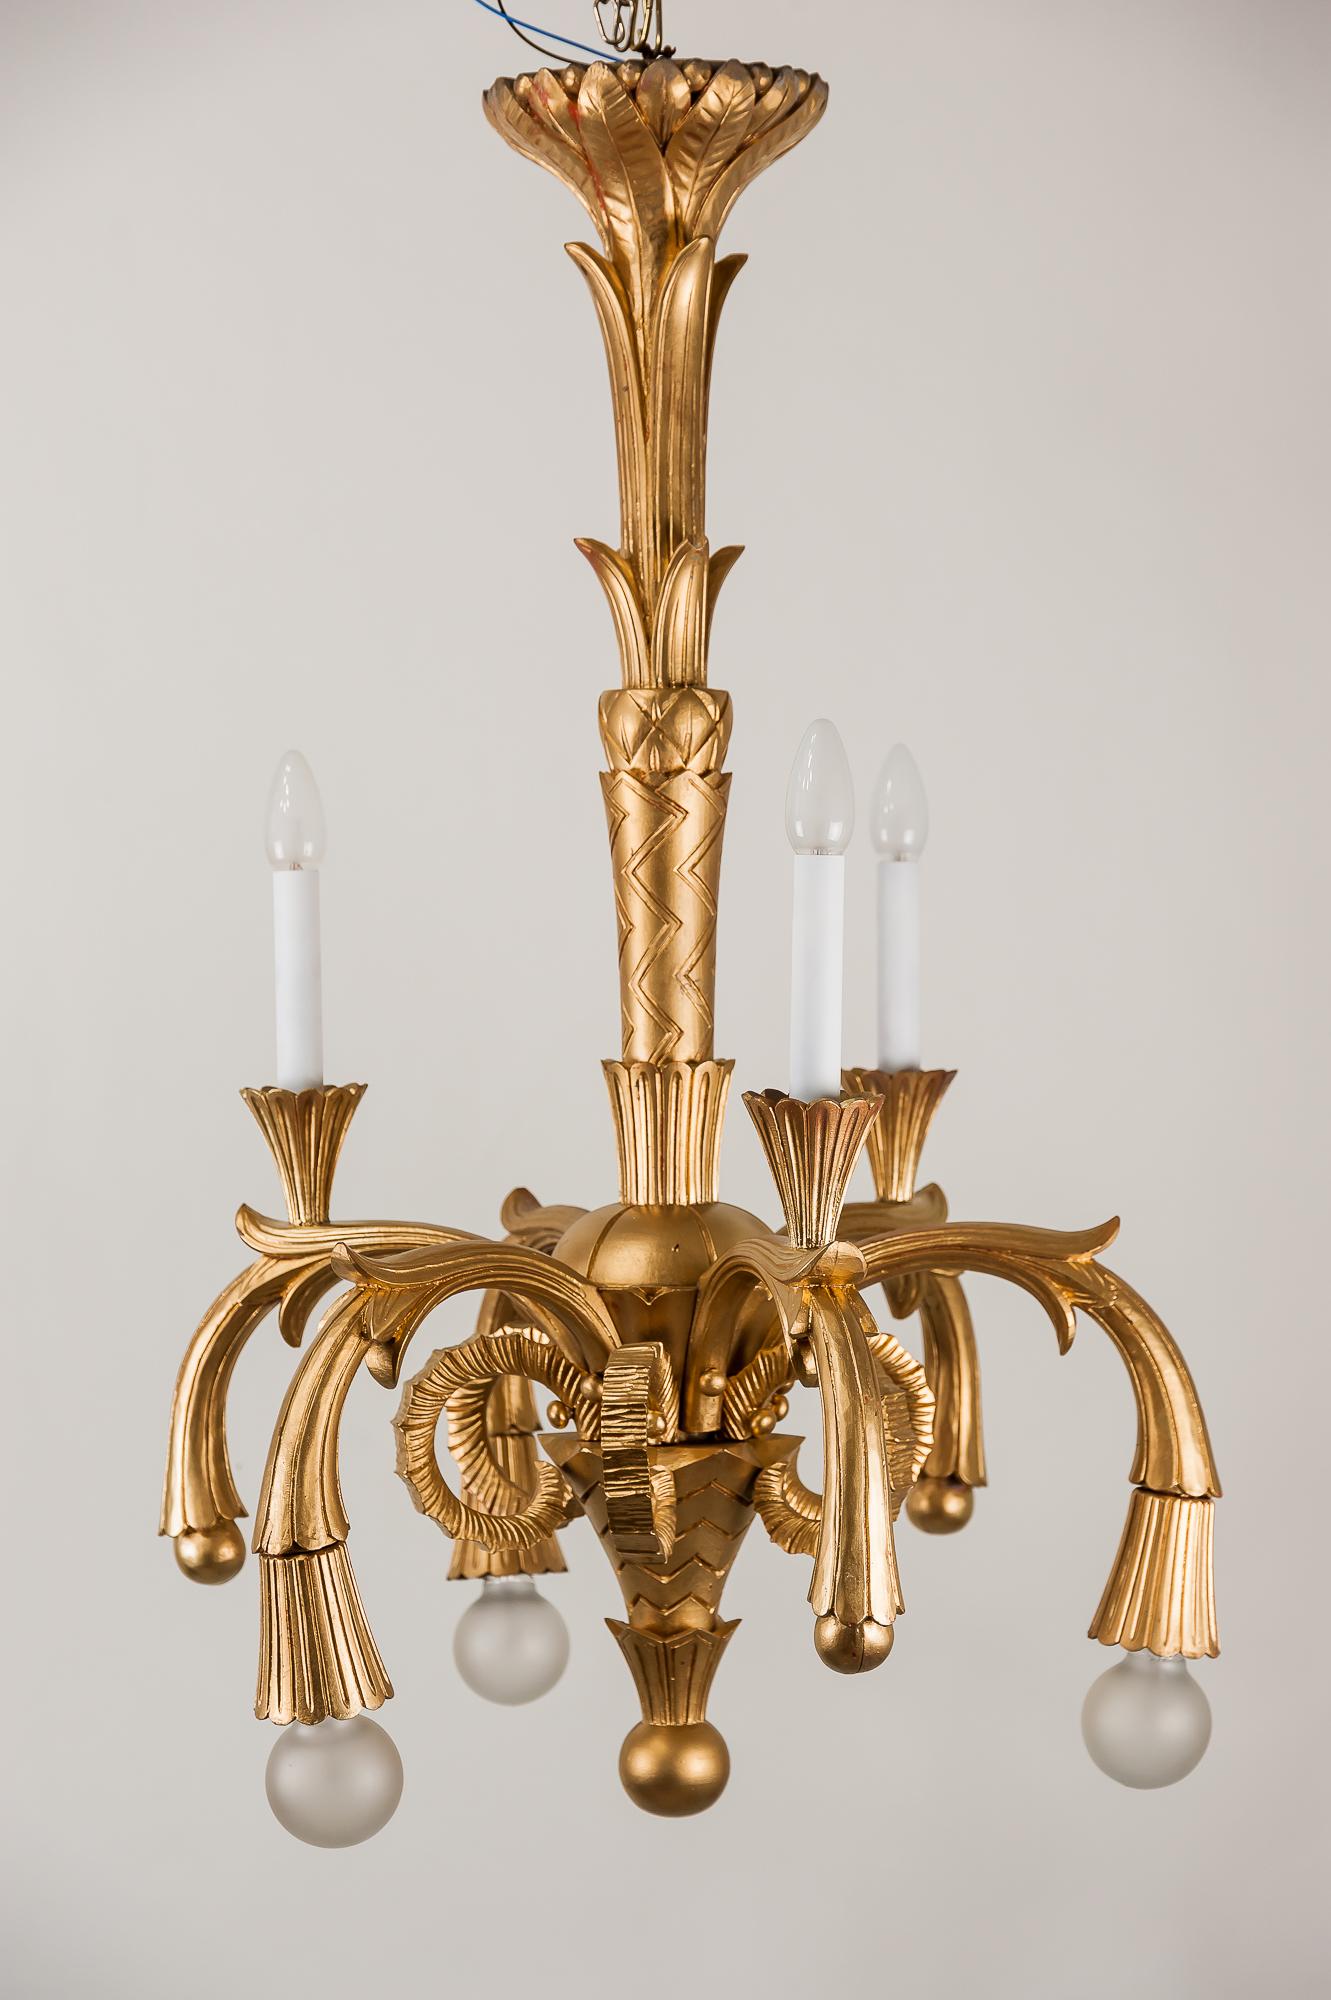 Art Deco carved wood chandelier, 1930s
Painted gold color
6 bulbs
Original condition.
 